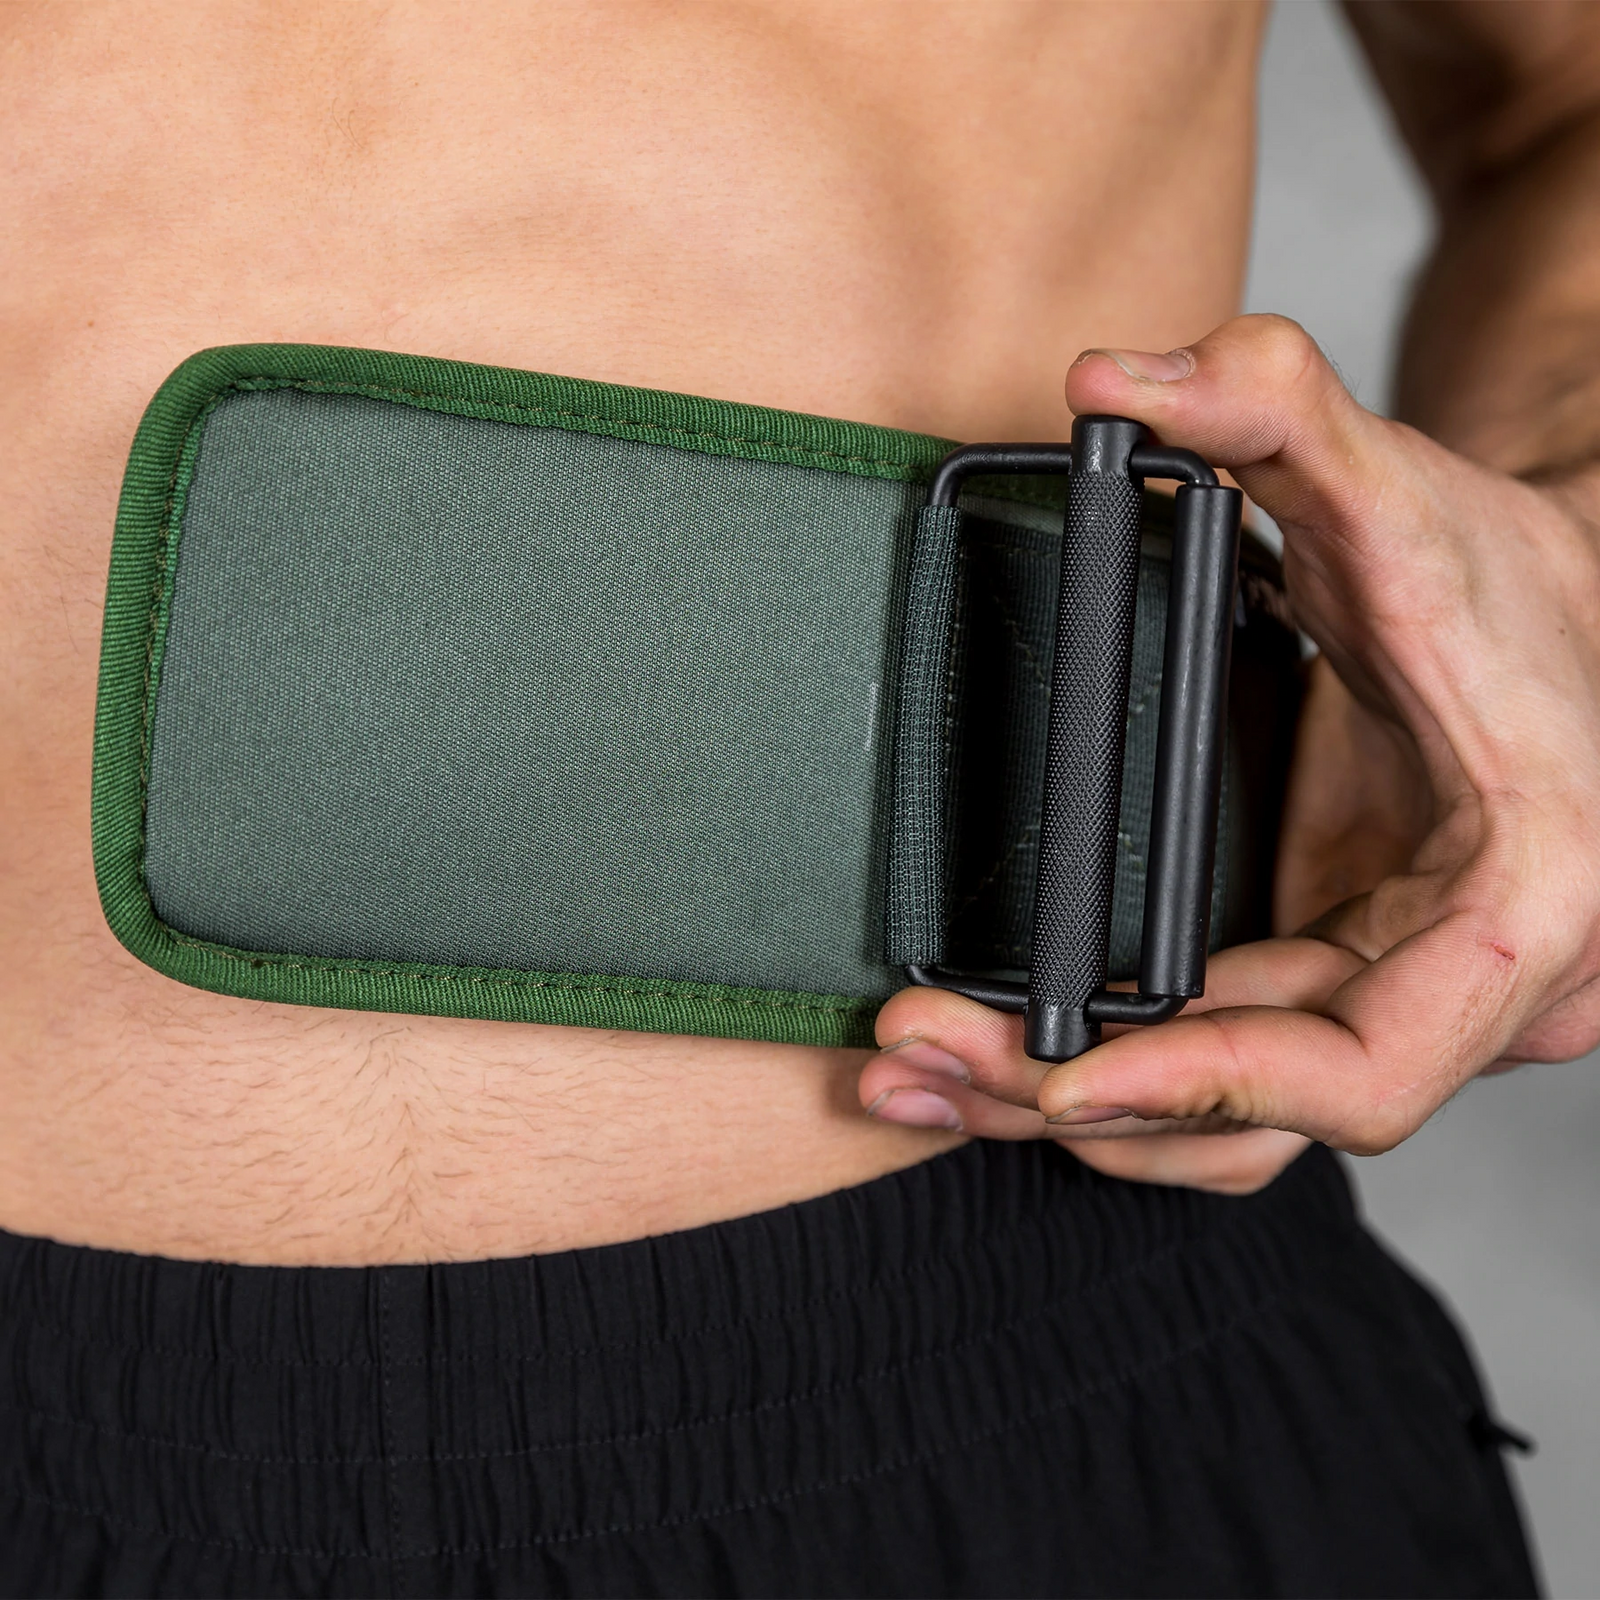 Green Velcro Patch 4 Weightlifting Belt - 2POOD